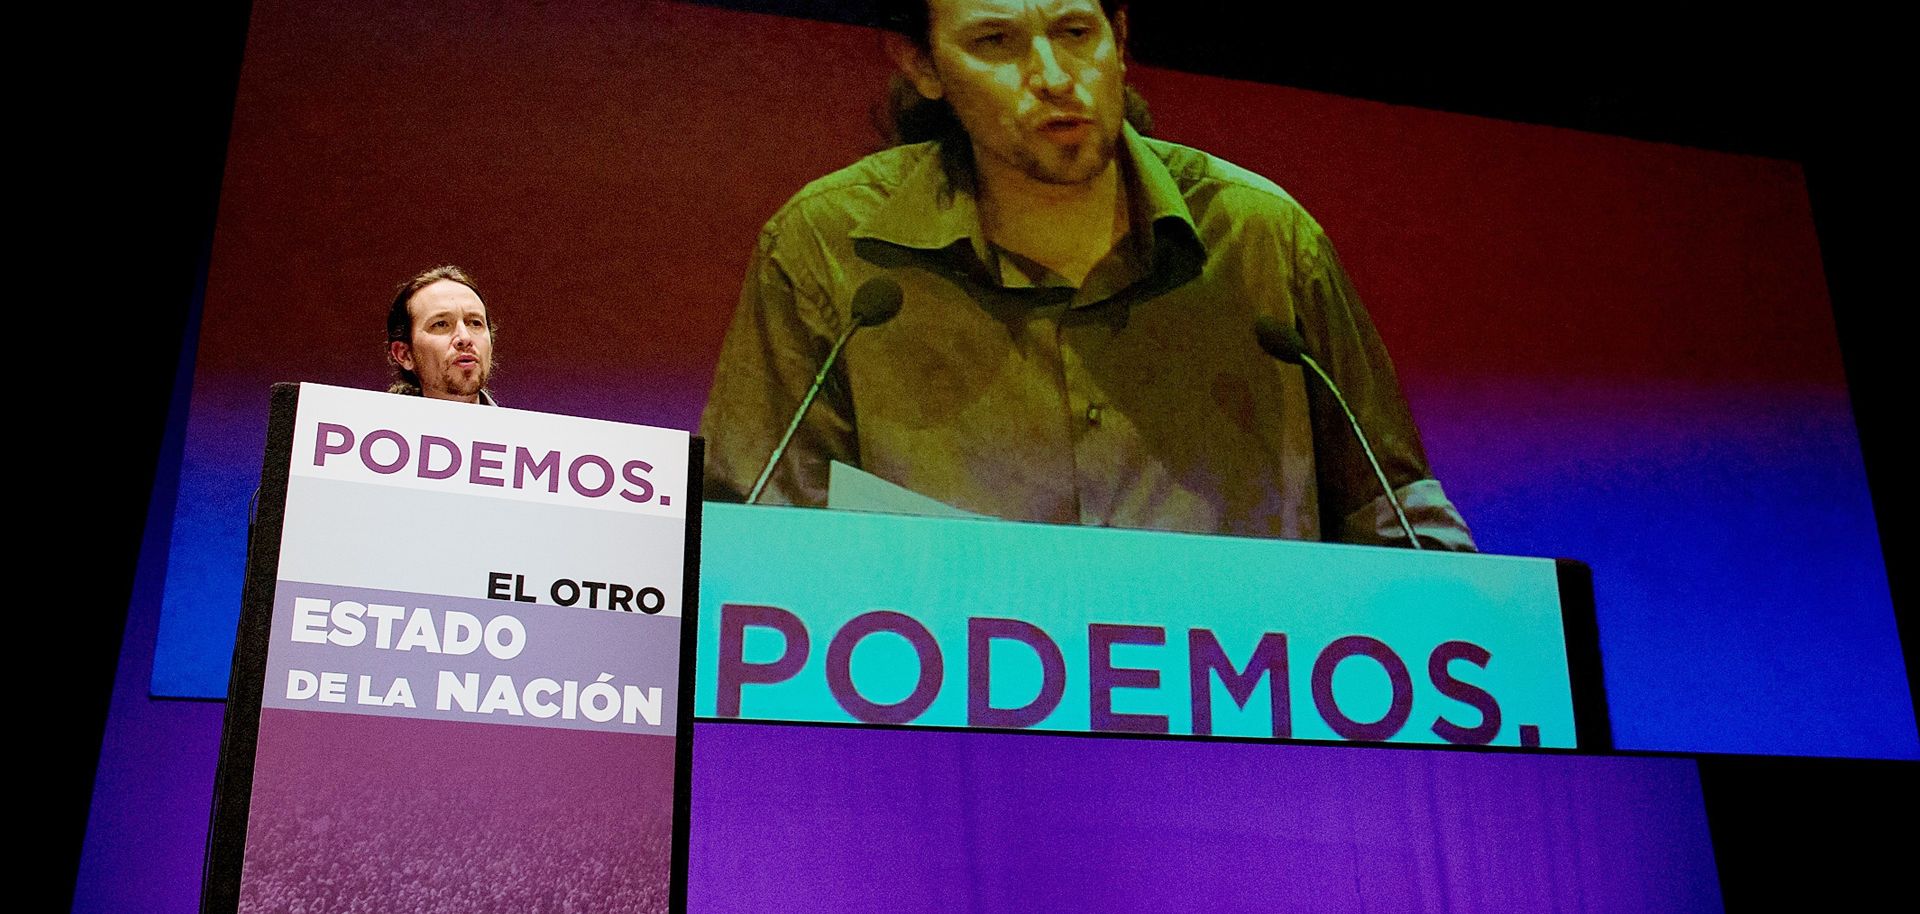 Podemos Faces Challenges in Spain